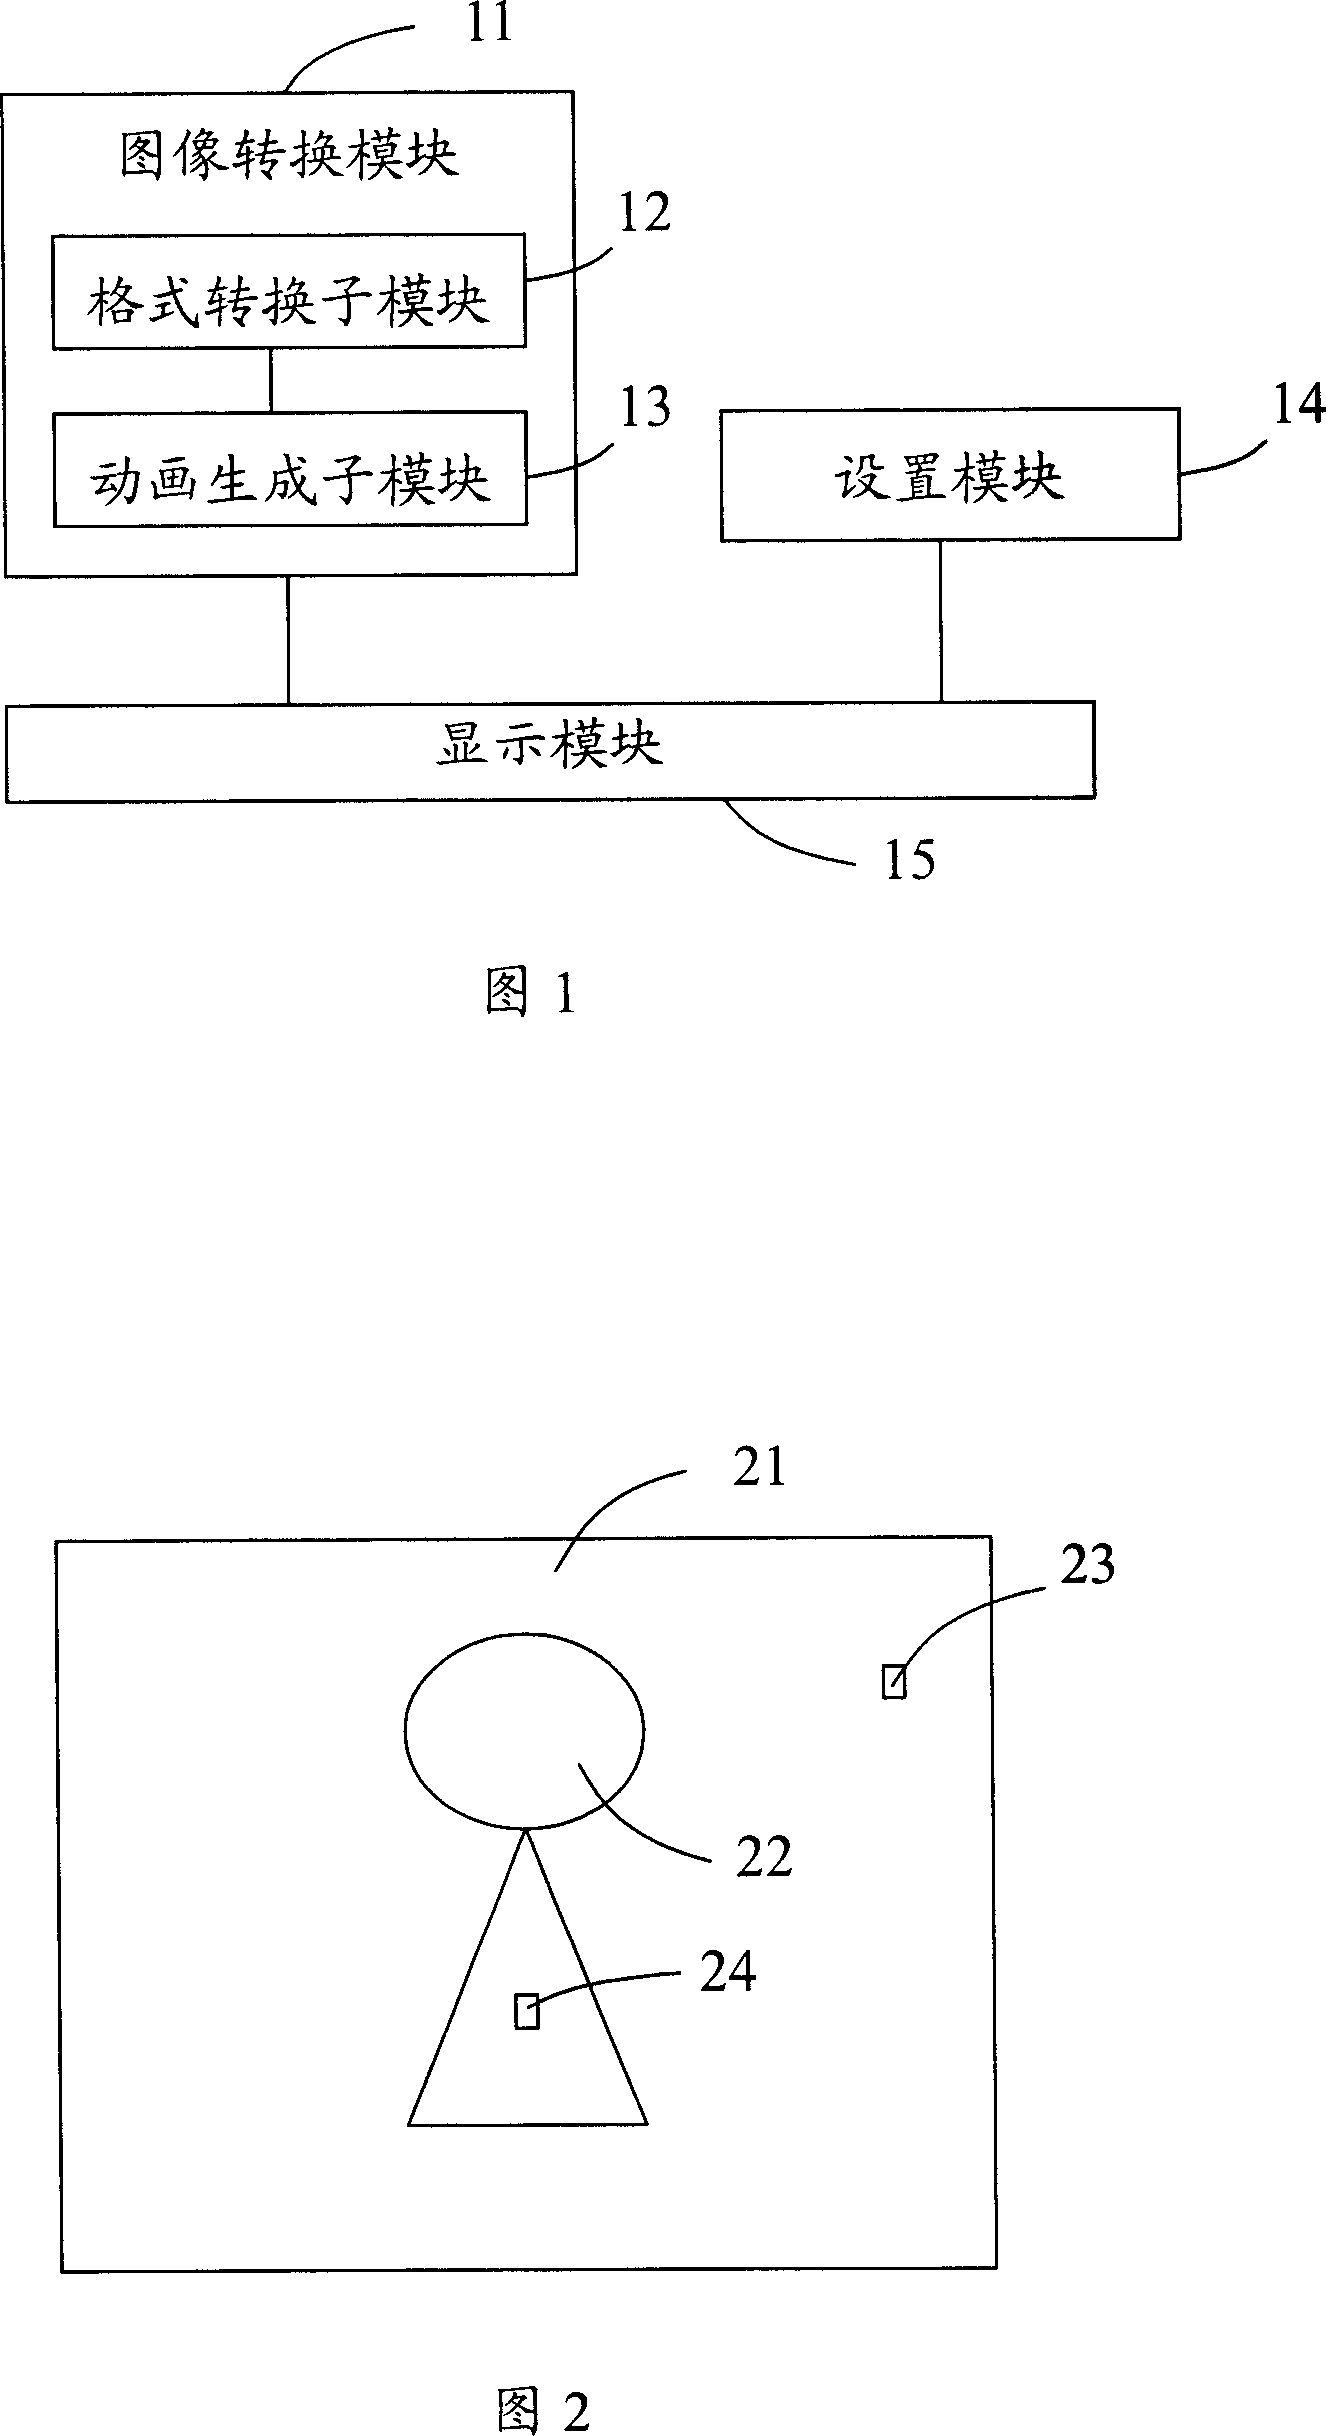 Method and system for forming interaction video frequency image